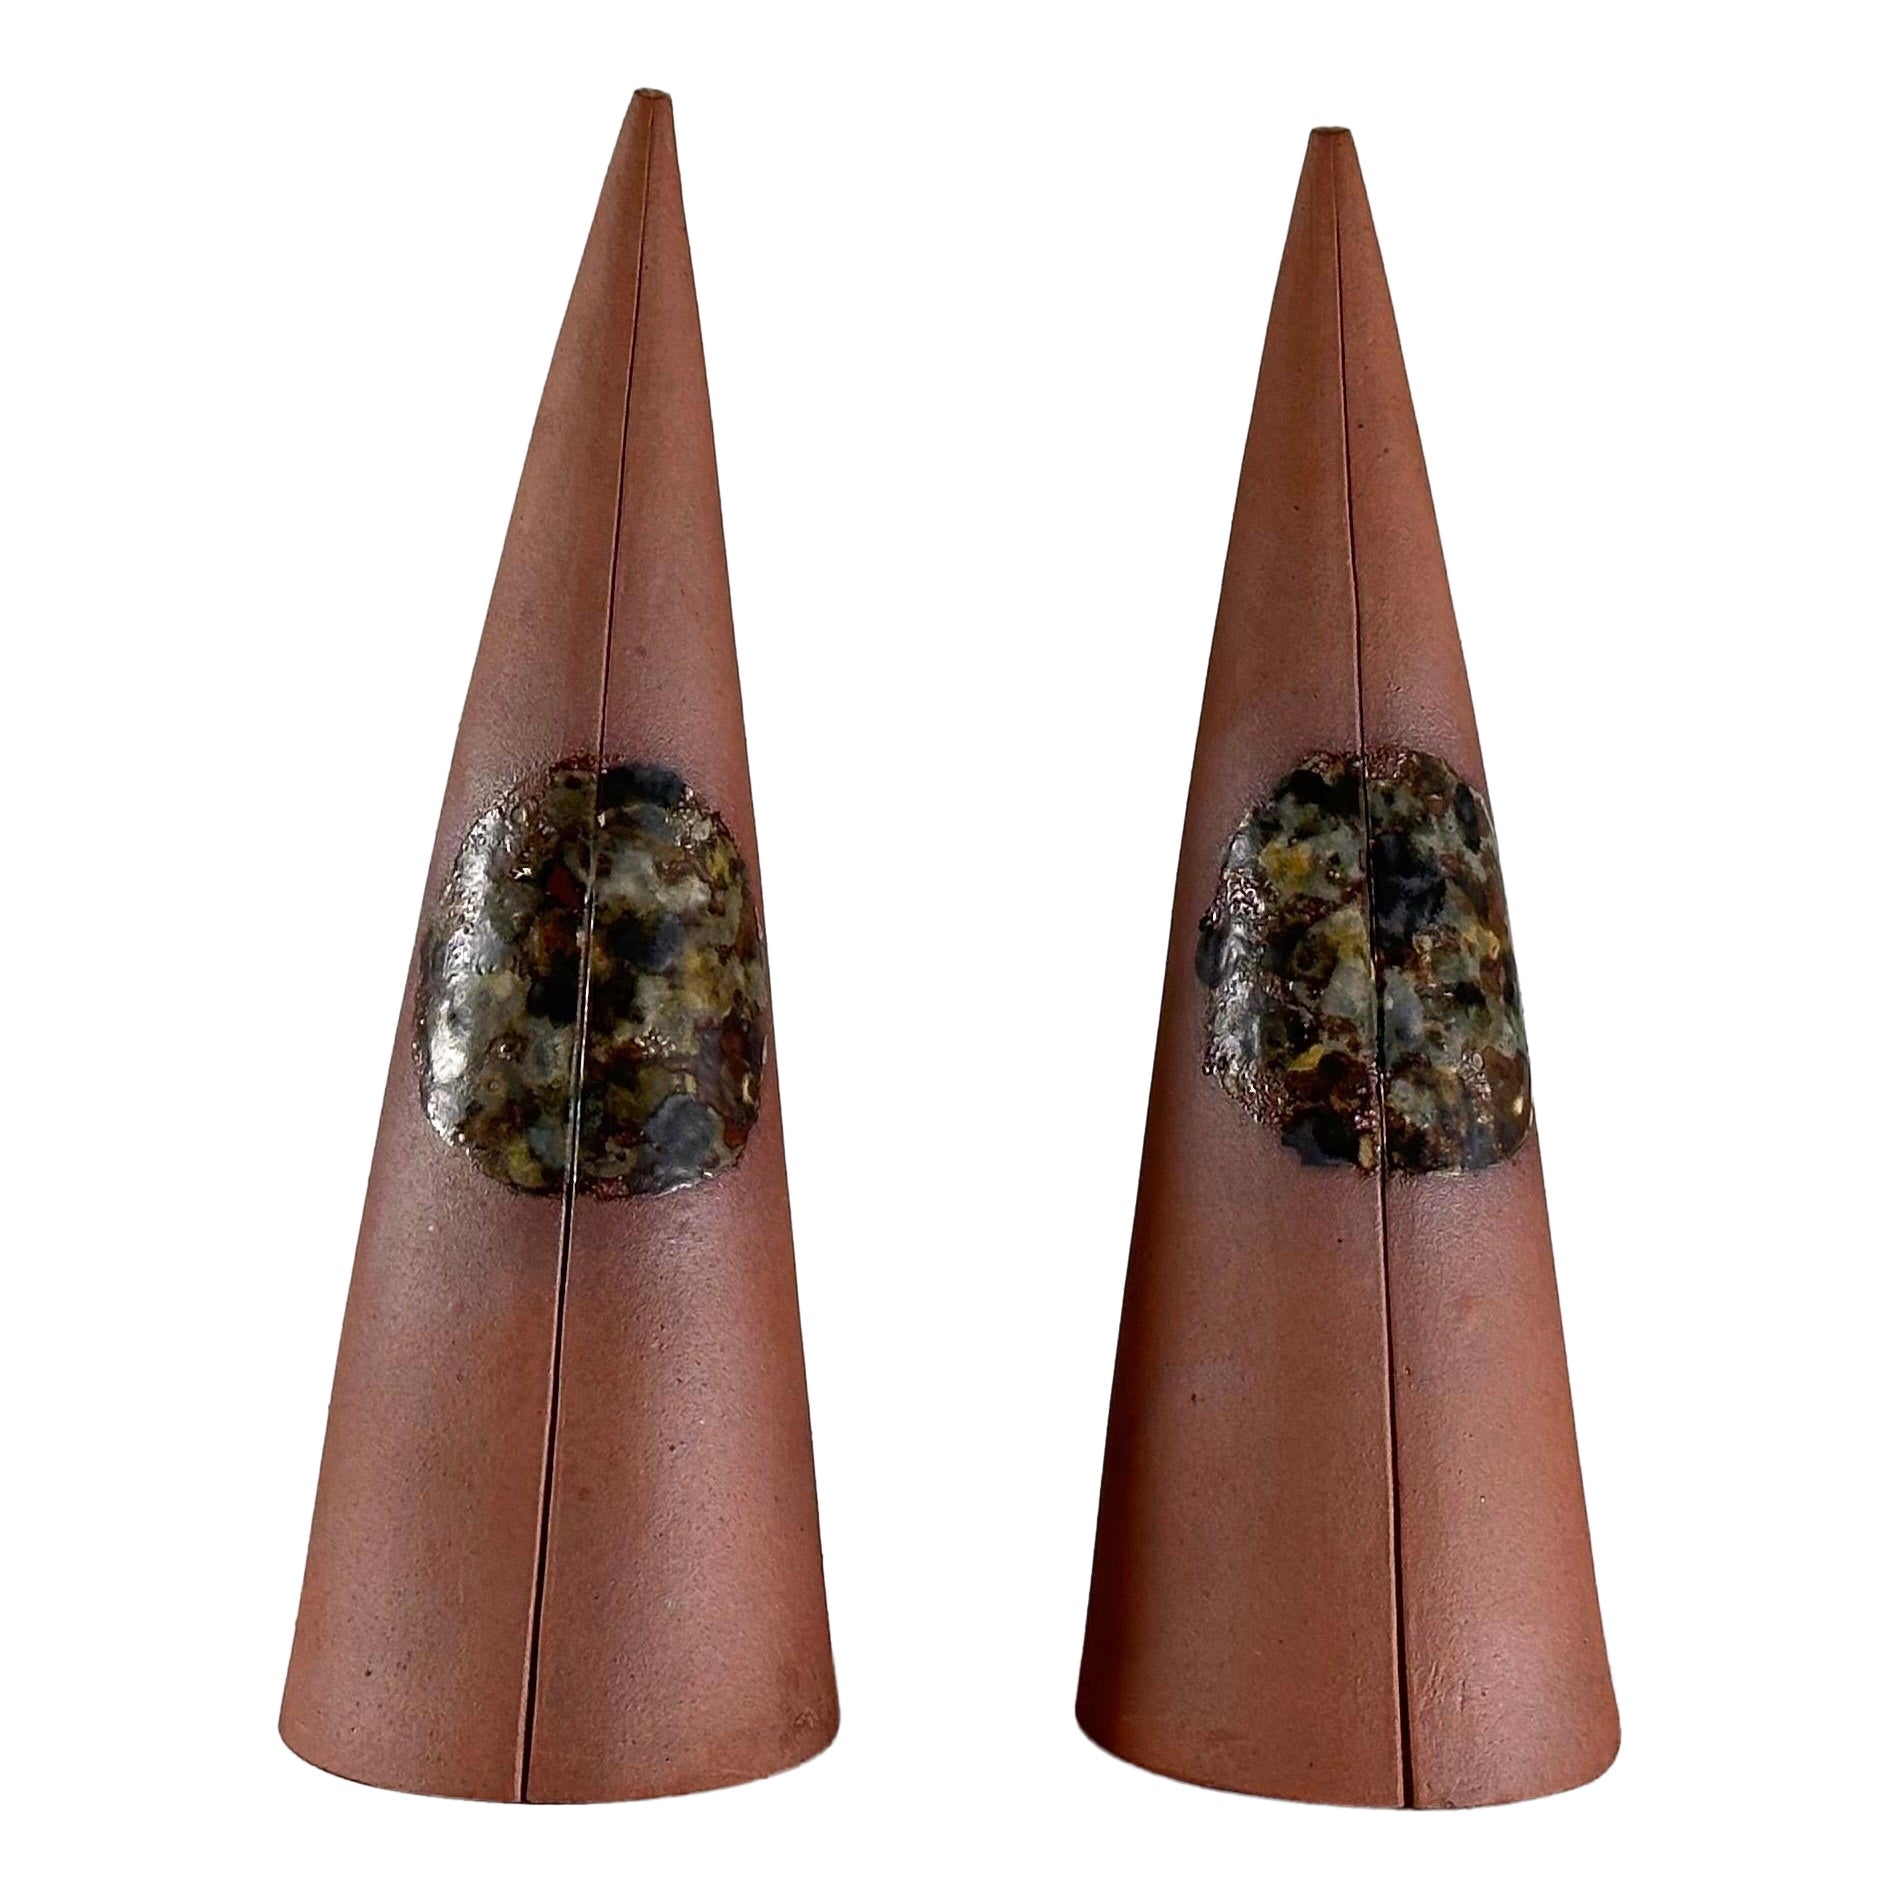 Exquisite Hand-Painted Ceramic Decorative Cones by Giancarlo Scapin, 1970s For Sale